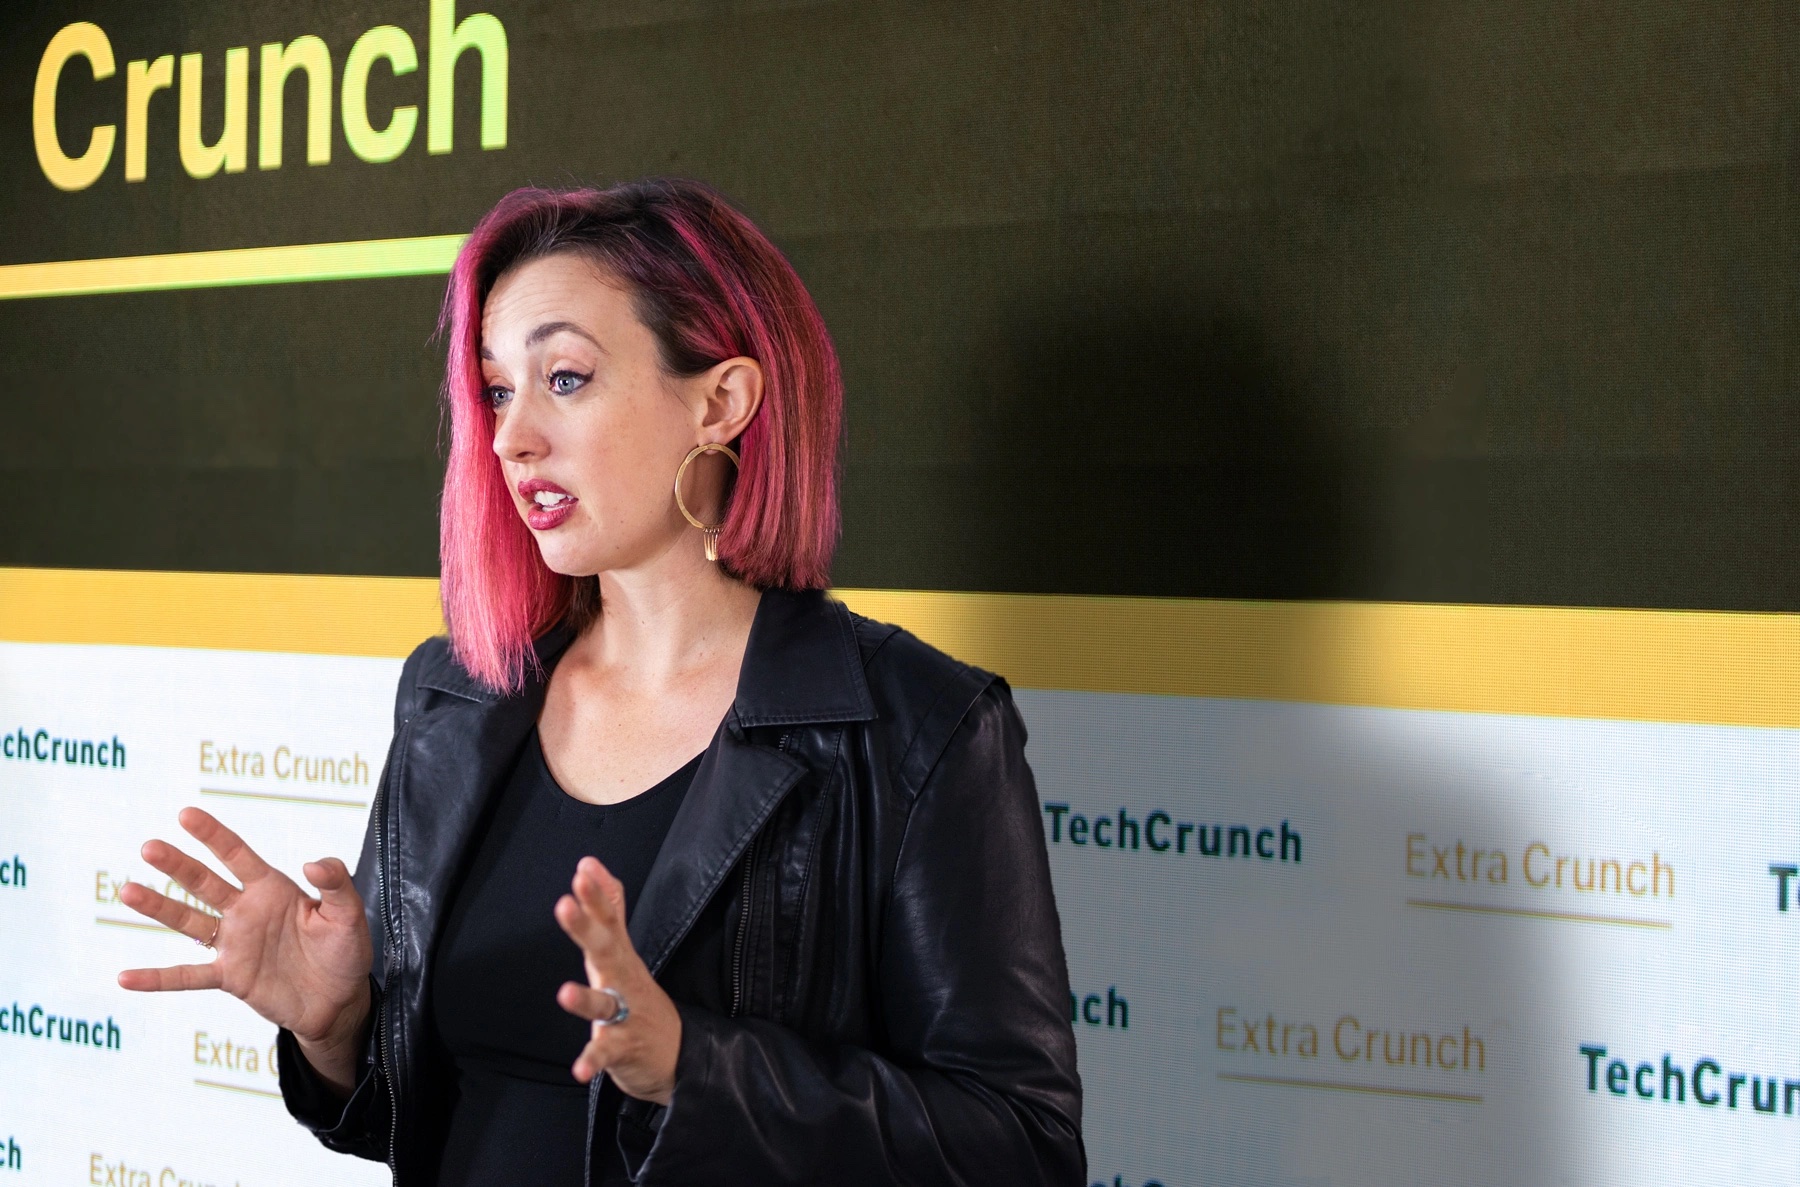 A composite image of immigration law attorney Sophie Alcorn in front of a background with a TechCrunch logo.